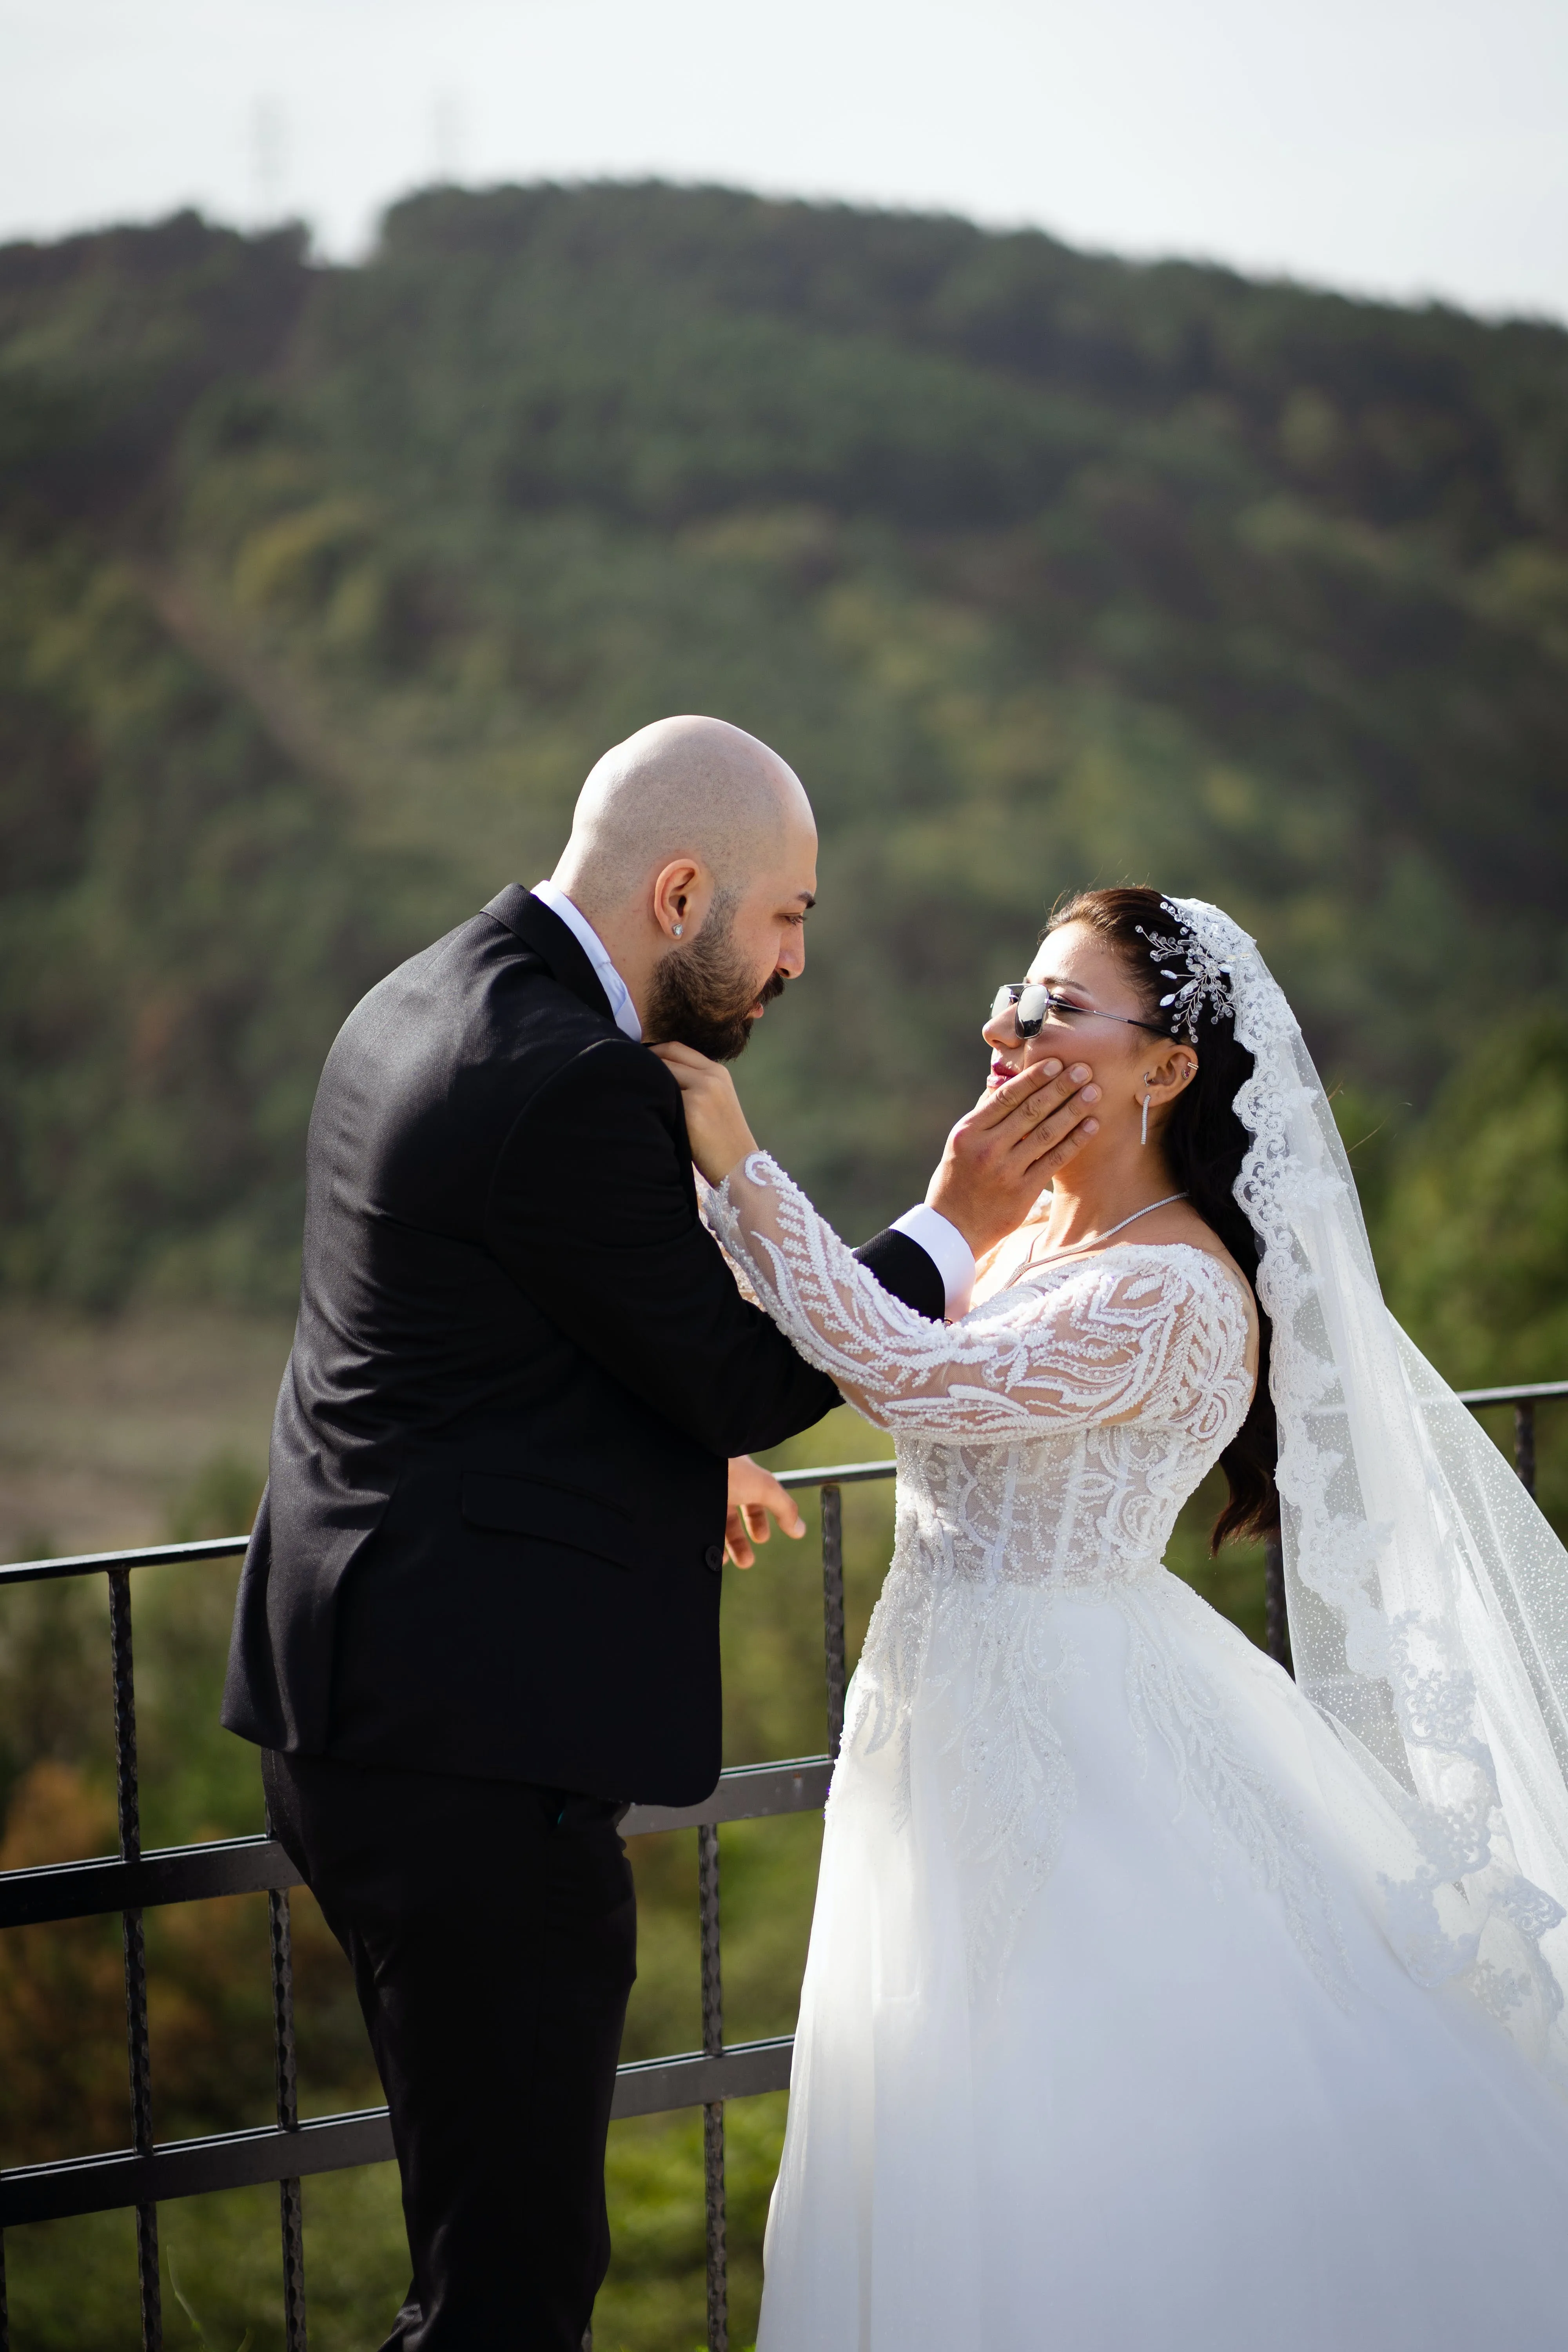 Insurance Tips for Newlyweds